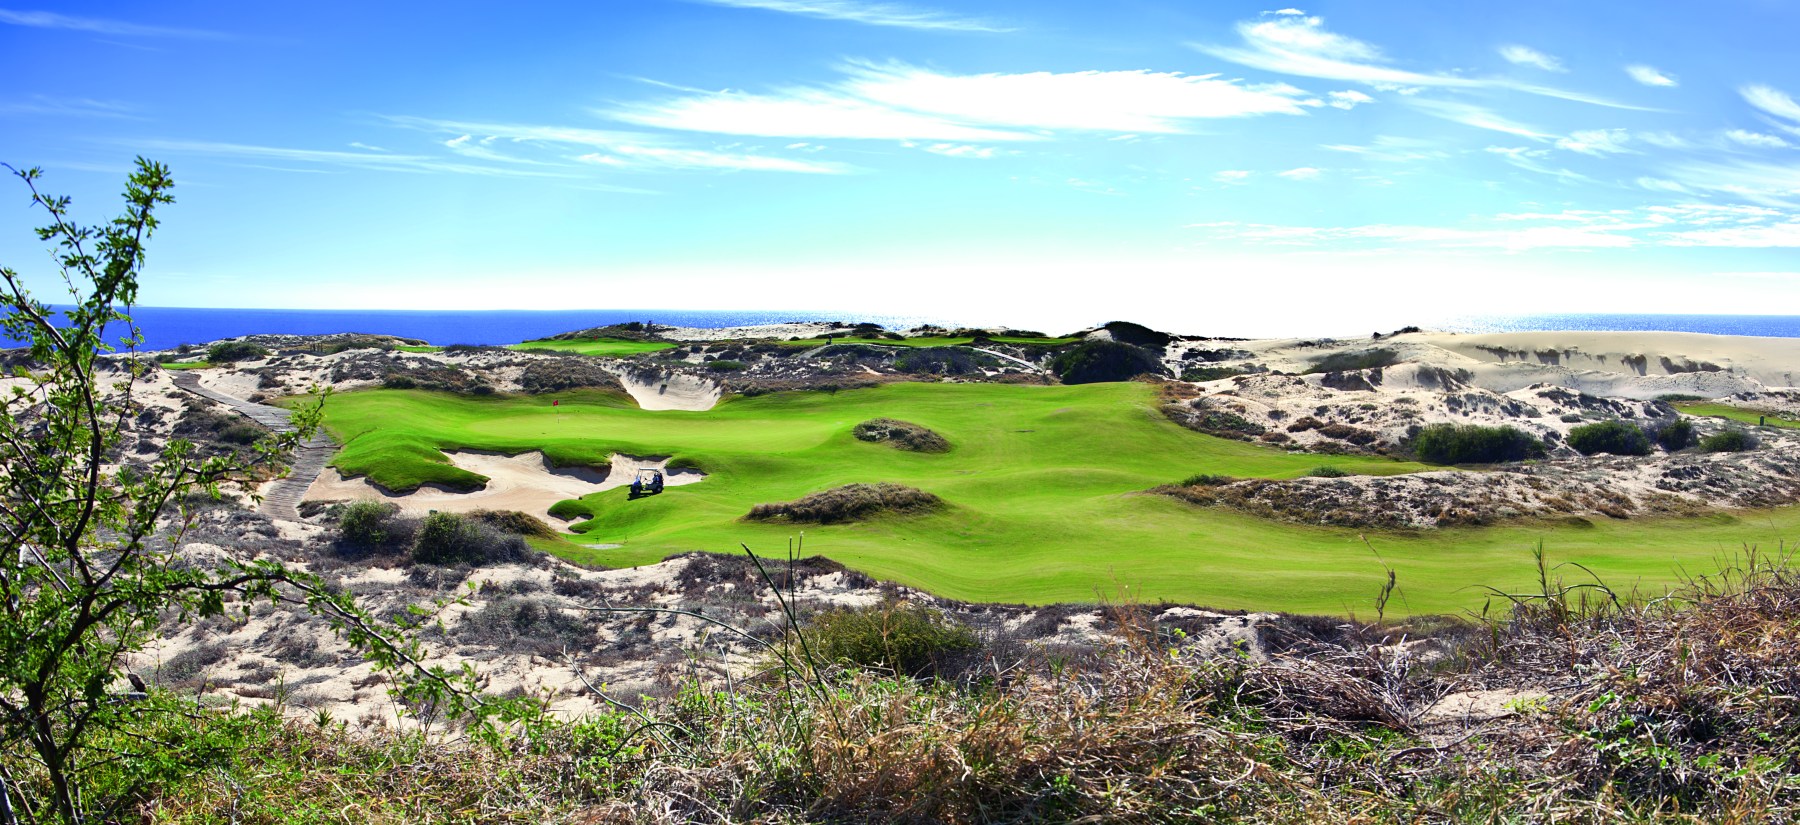 <strong>DIAMANTE CABO SAN LUCAS: DUNES</strong>, Mexico. The eponymous dunes create an otherworldly golf landscape.<br><br>Waldek says: “Diamante Cabo San Lucas’ Dunes Course, is one of the most highly ranked in Latin America. There’s the bright green of the grass, the deep azure of the sea, the pale blue of the sky and the stark beige of the sand dunes, which all together make for one beautiful golf course.”<br>